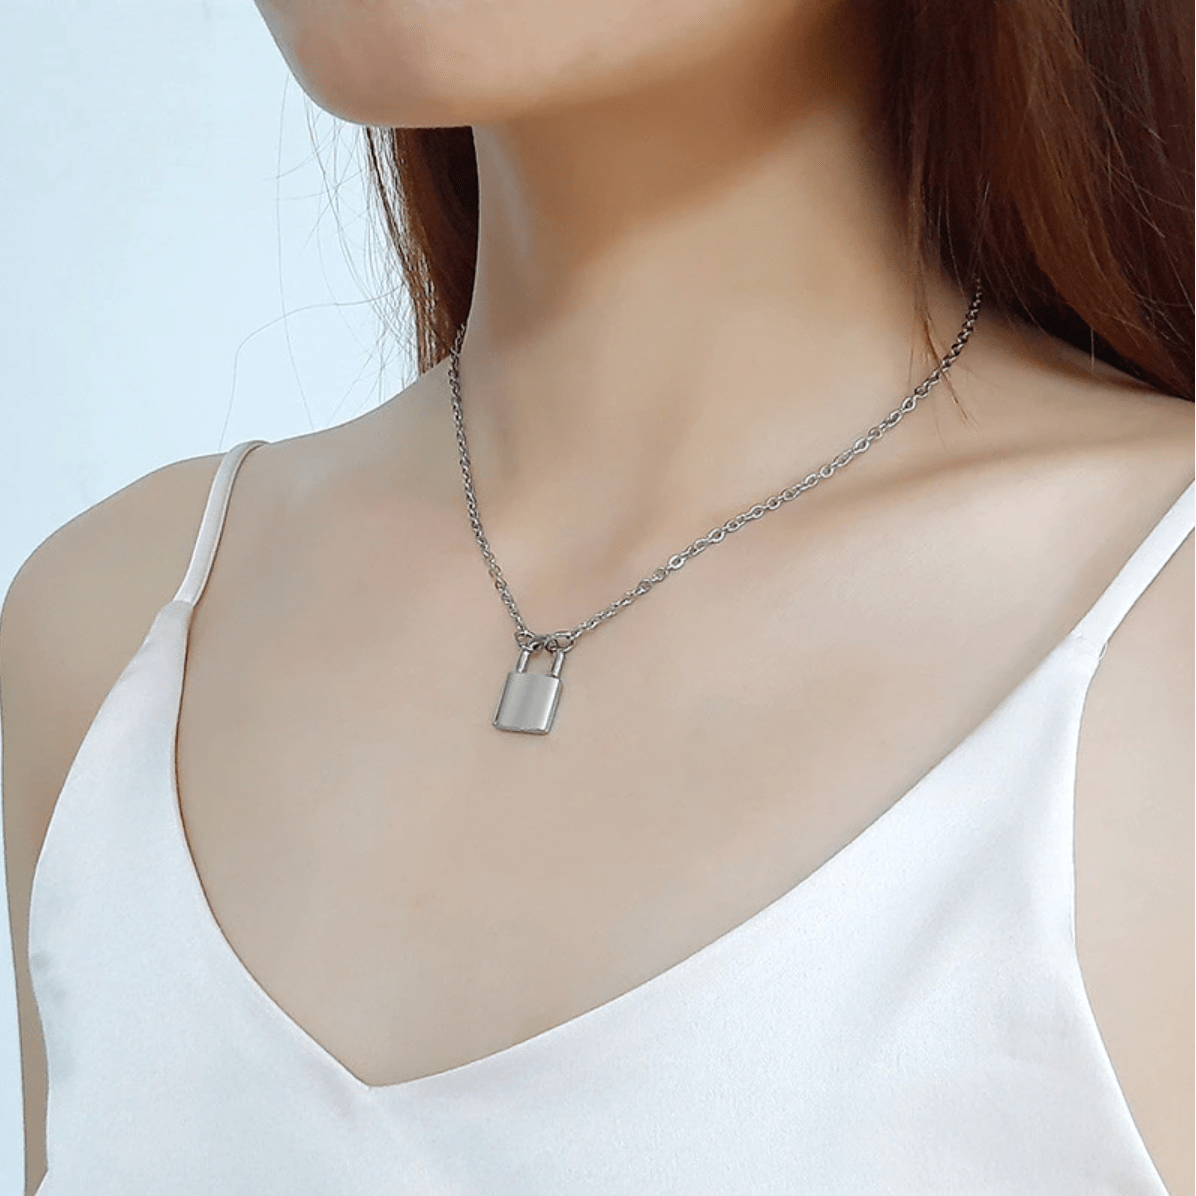 Opes Robur SILVER DAINTY PADLOCK NECKLACE